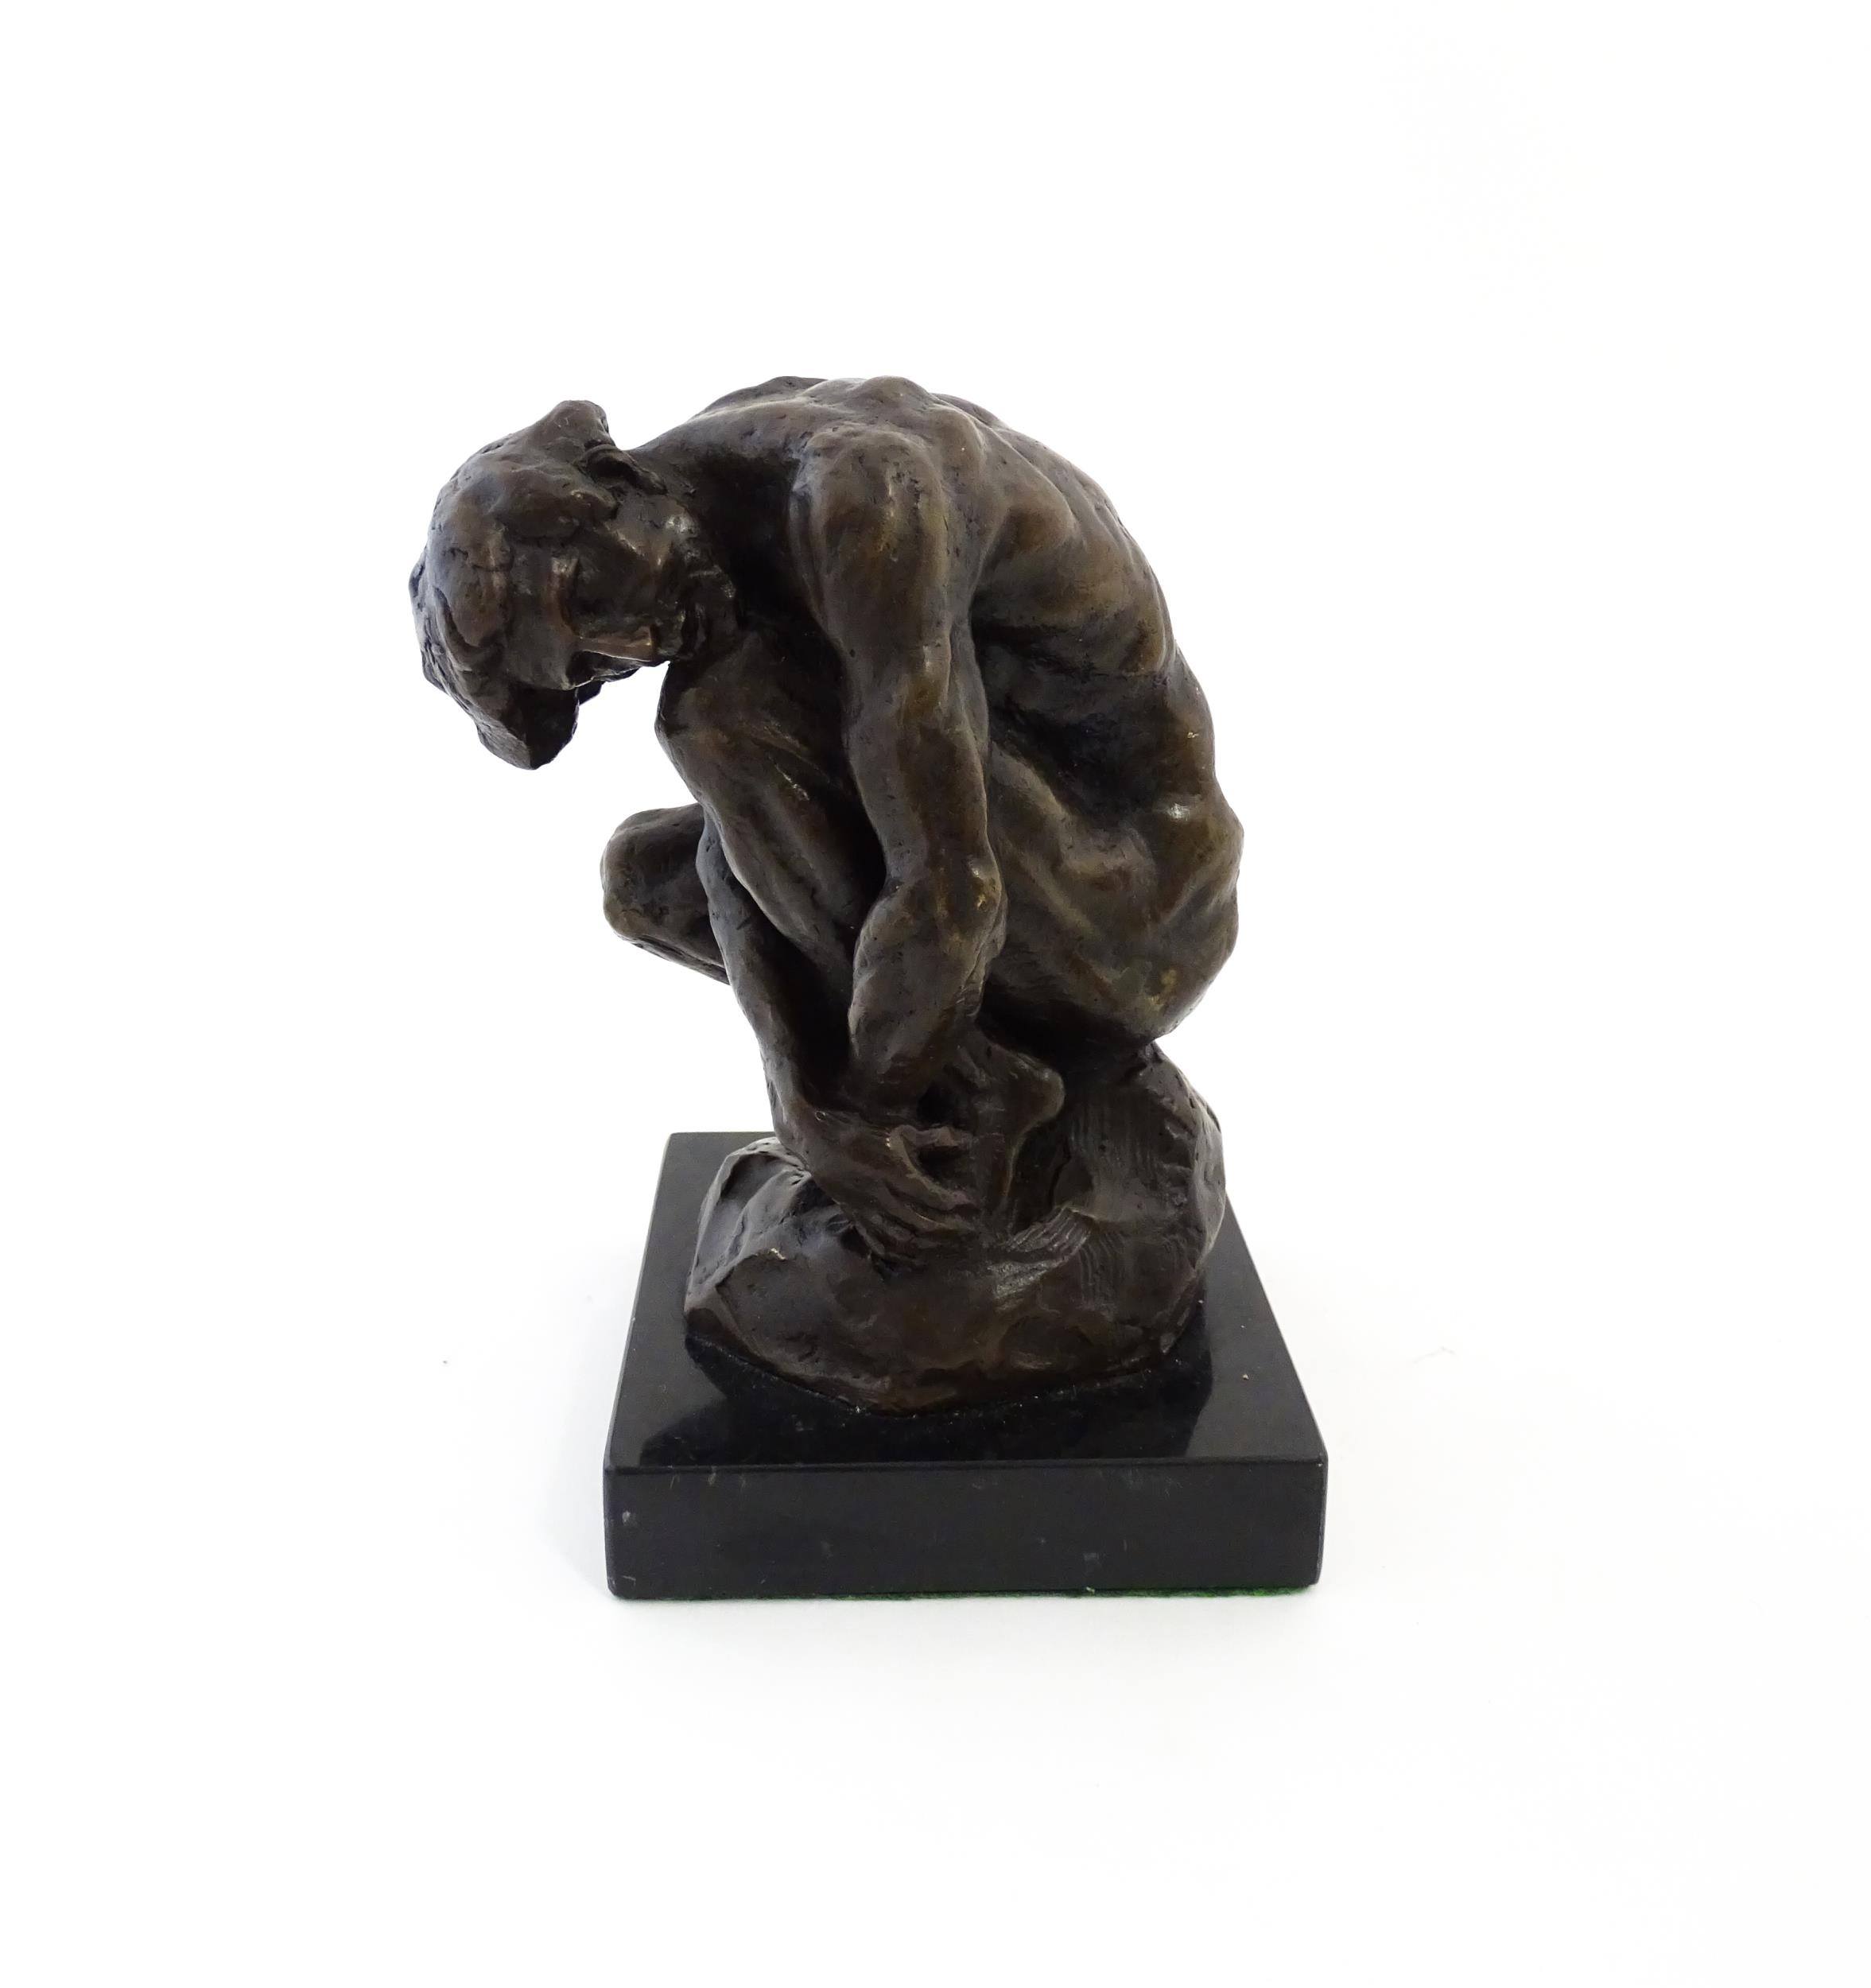 A thC cast bronze model of a crouching male nude. In the m - Auguste Rodin